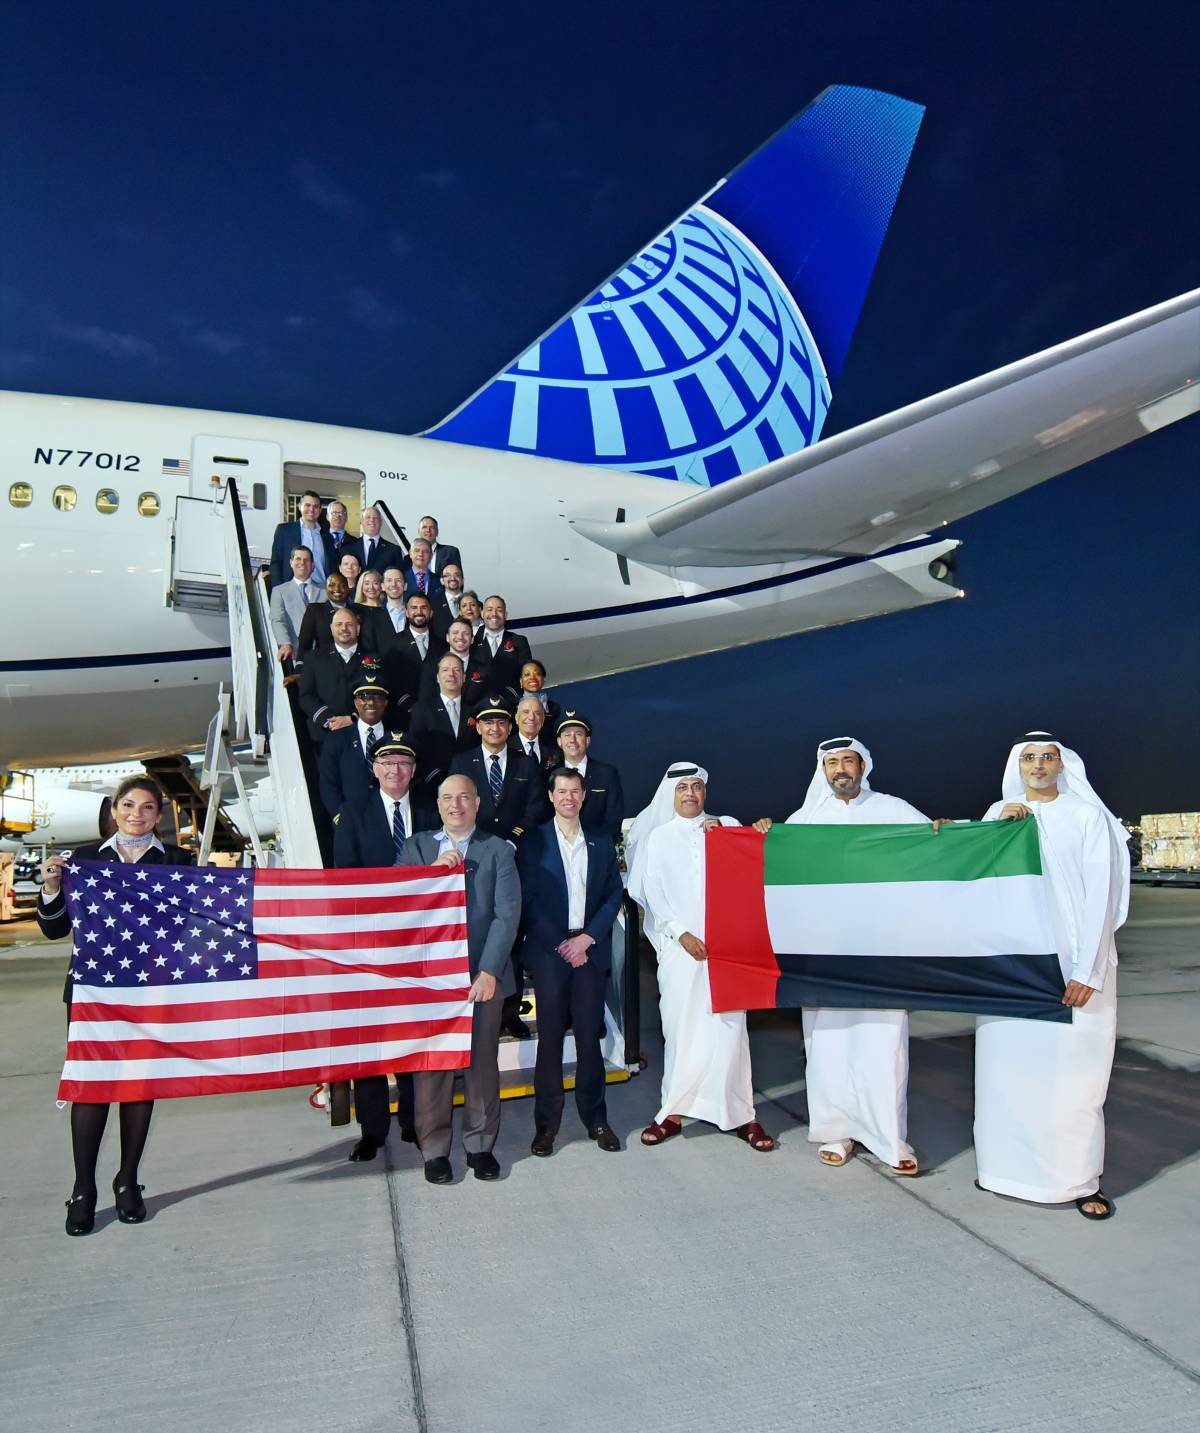 United Airlines celebrates a year of nonstop service from Dubai to New York/Newark